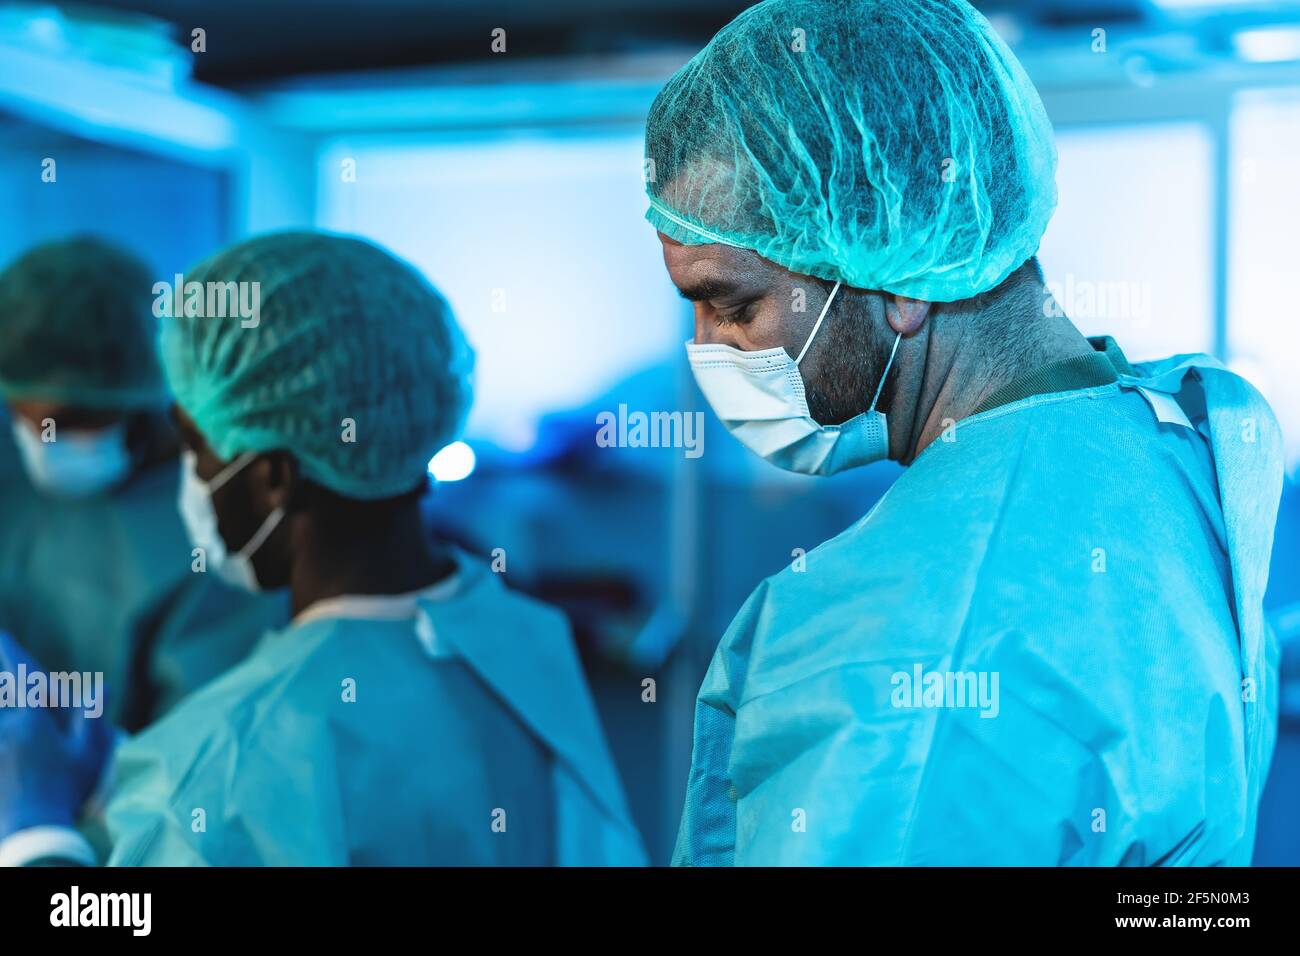 Doctors preparing inside surgical operation room - Medical workers getting ready for fighting against coronavirus pandemic Stock Photo